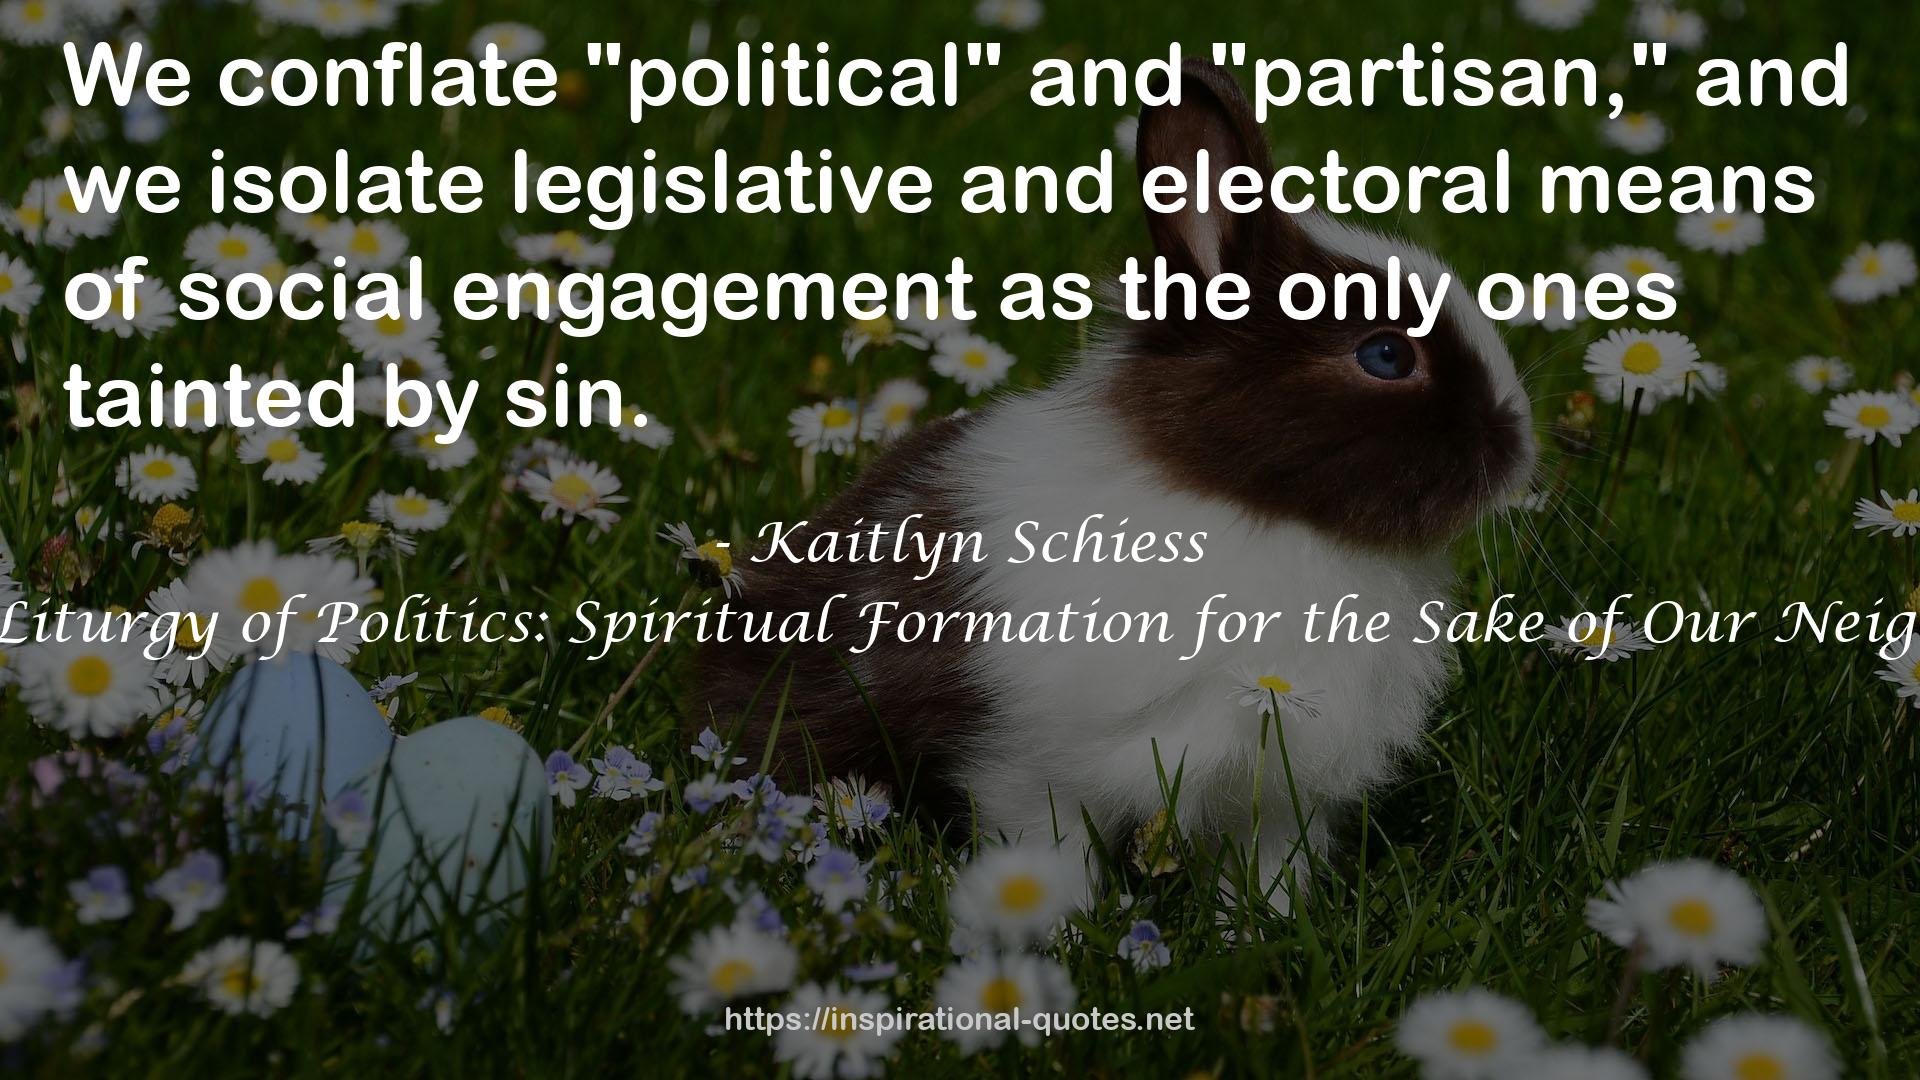 The Liturgy of Politics: Spiritual Formation for the Sake of Our Neighbor QUOTES